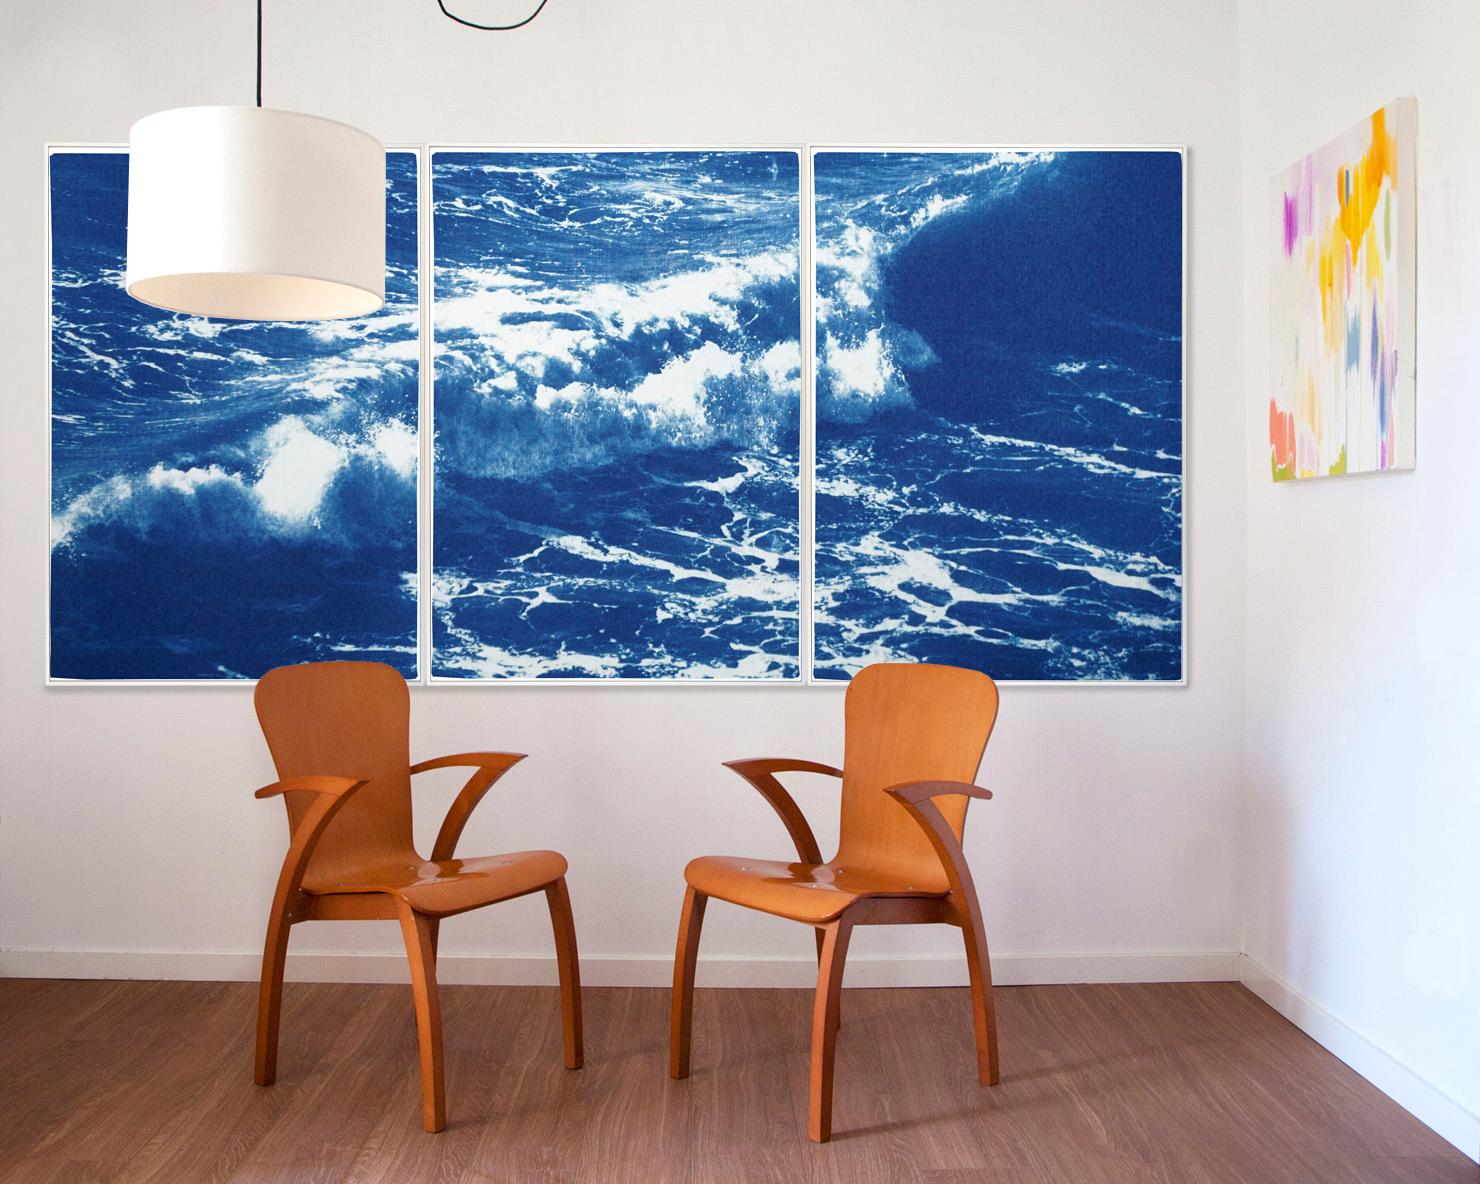 Australian Rolling Waves, Nautical Triptych of Vigorous Coast, Large Seascape - Painting by Kind of Cyan